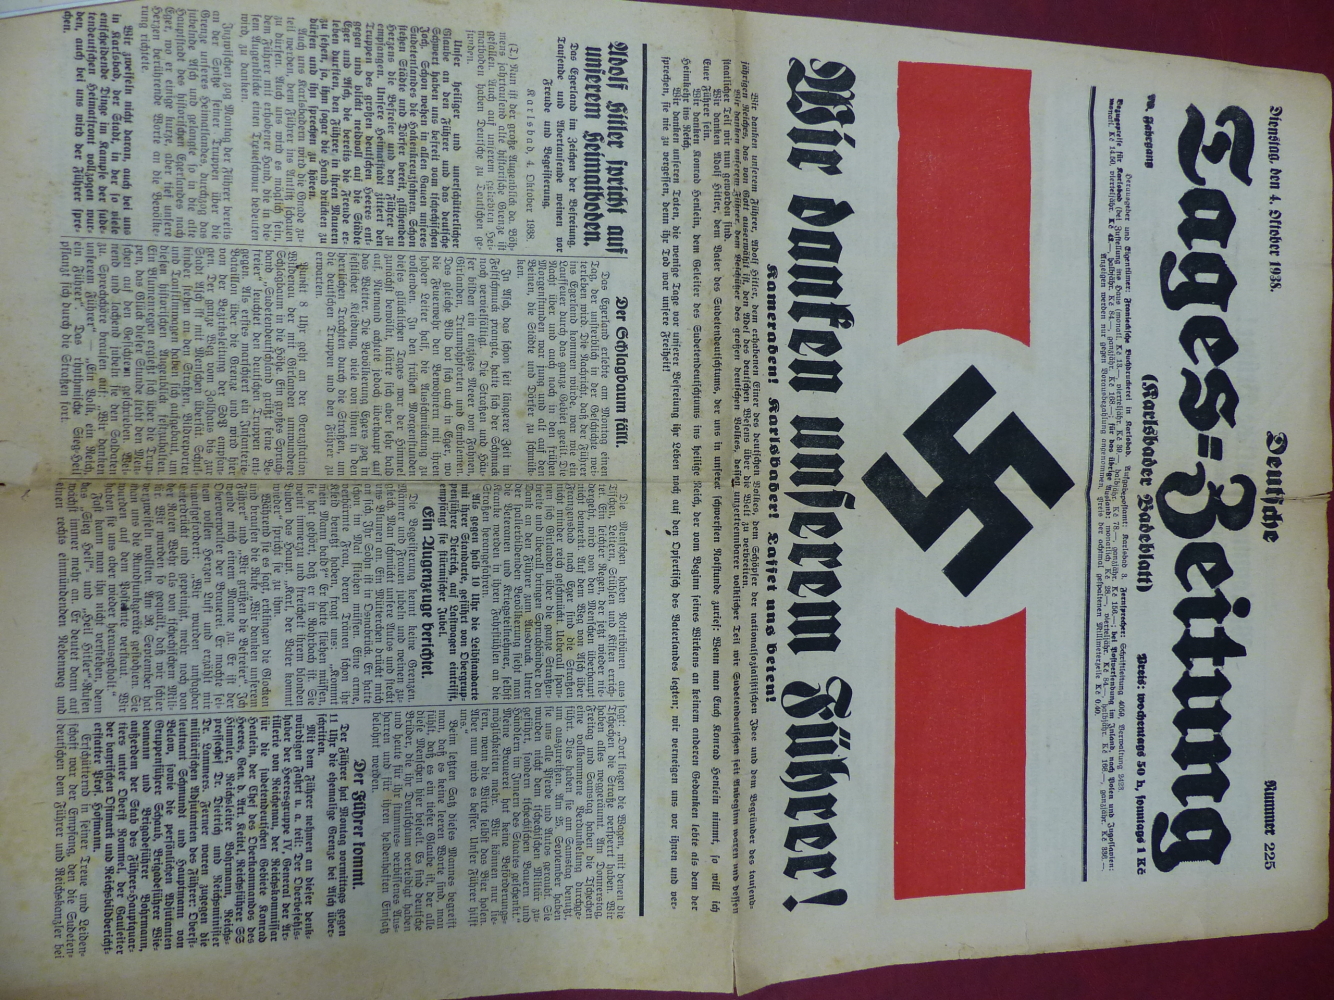 A COPY OF THE DEUTSCHE TAGES-ZEITUNG FOR THE 4TH OCTOBER 1938